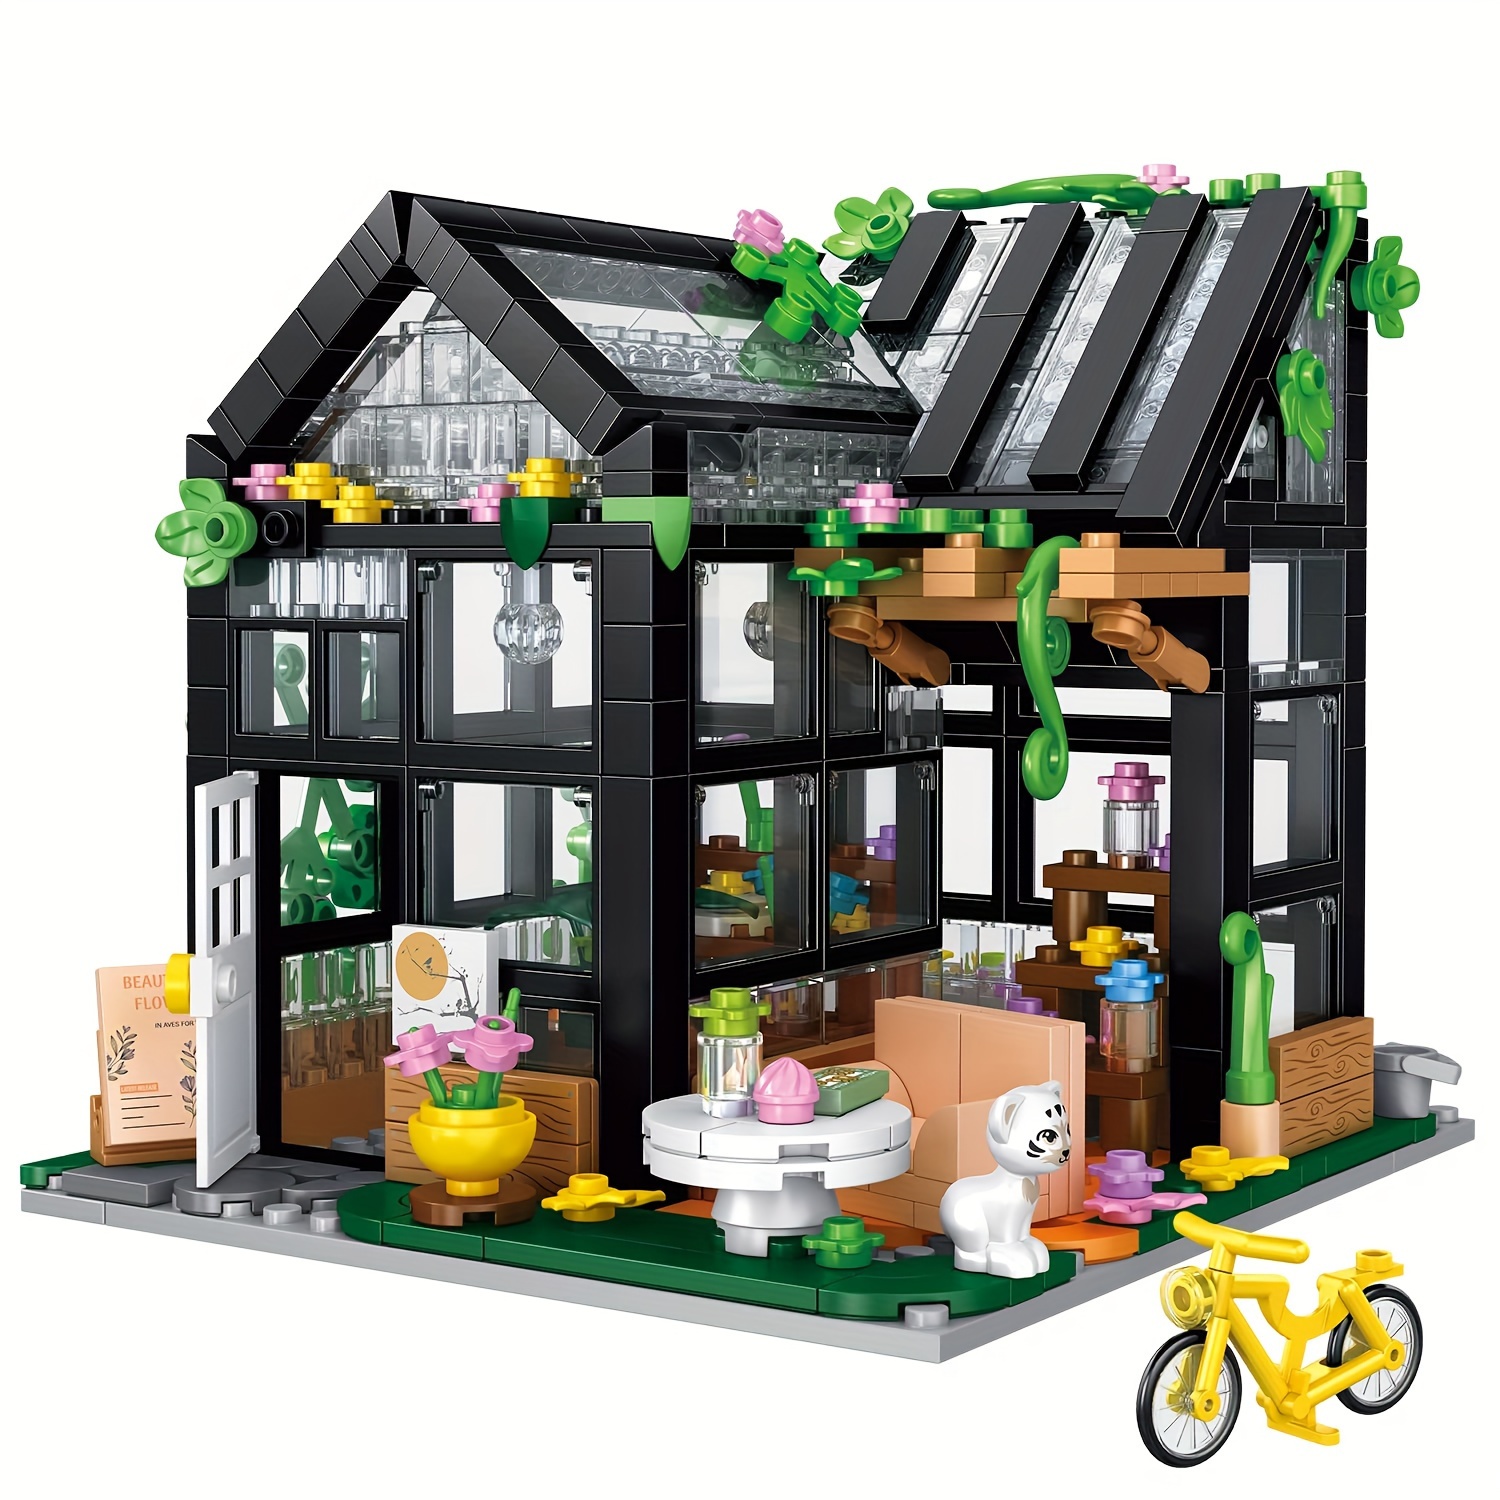 

Flower House Building Set, Flower Friends House, Create A Warm And Beautiful Gift